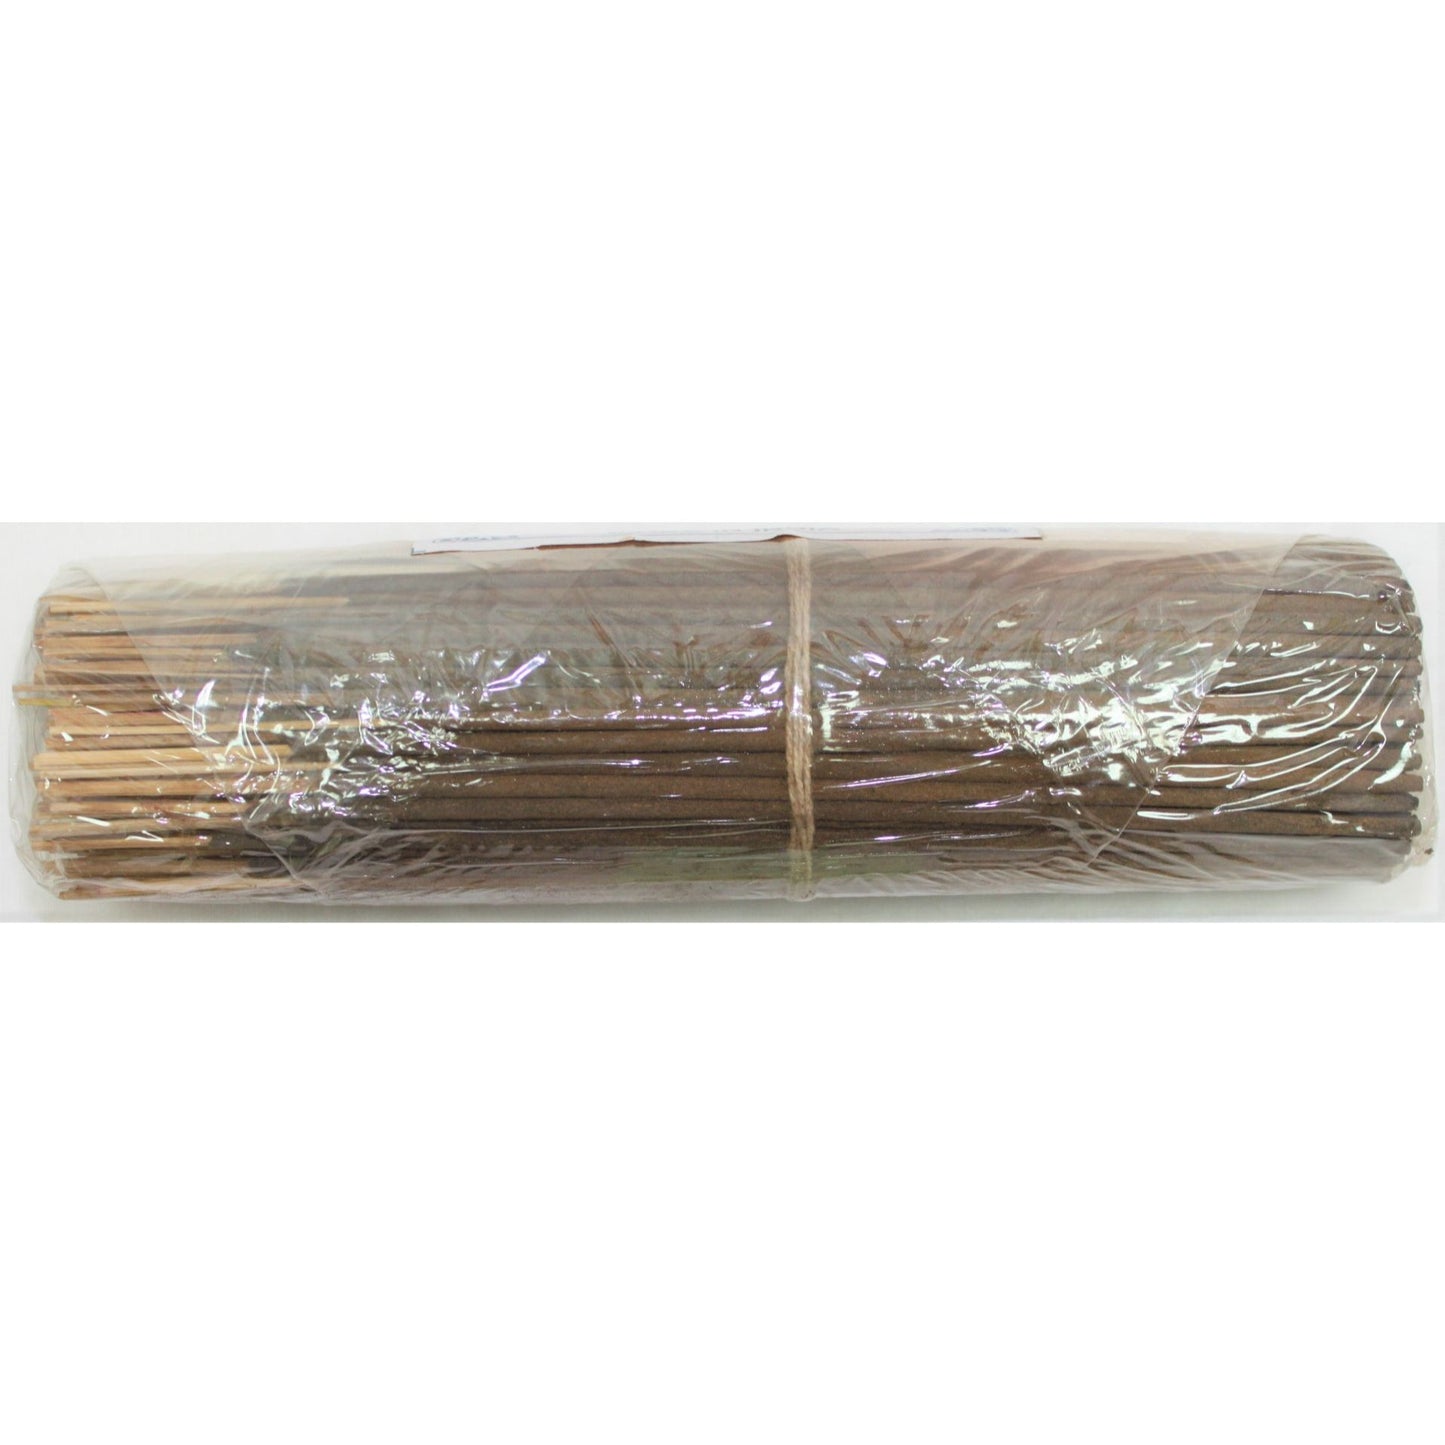 Incense From India - Serenity